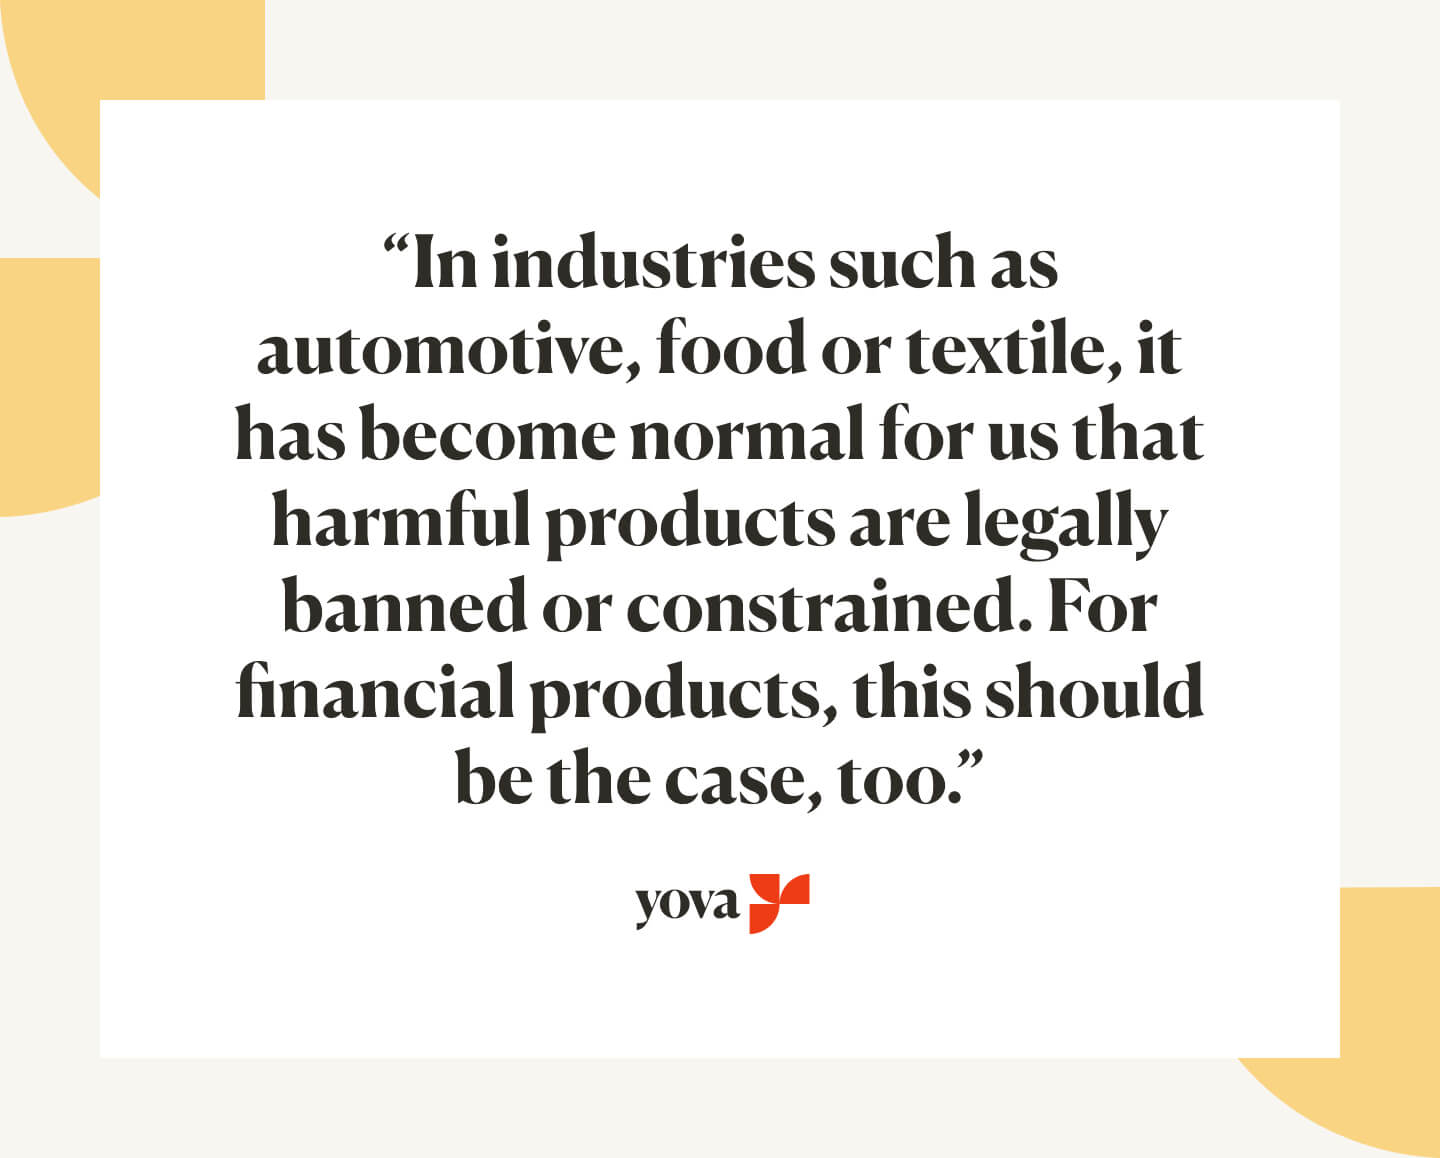 Financial products need to be regulated